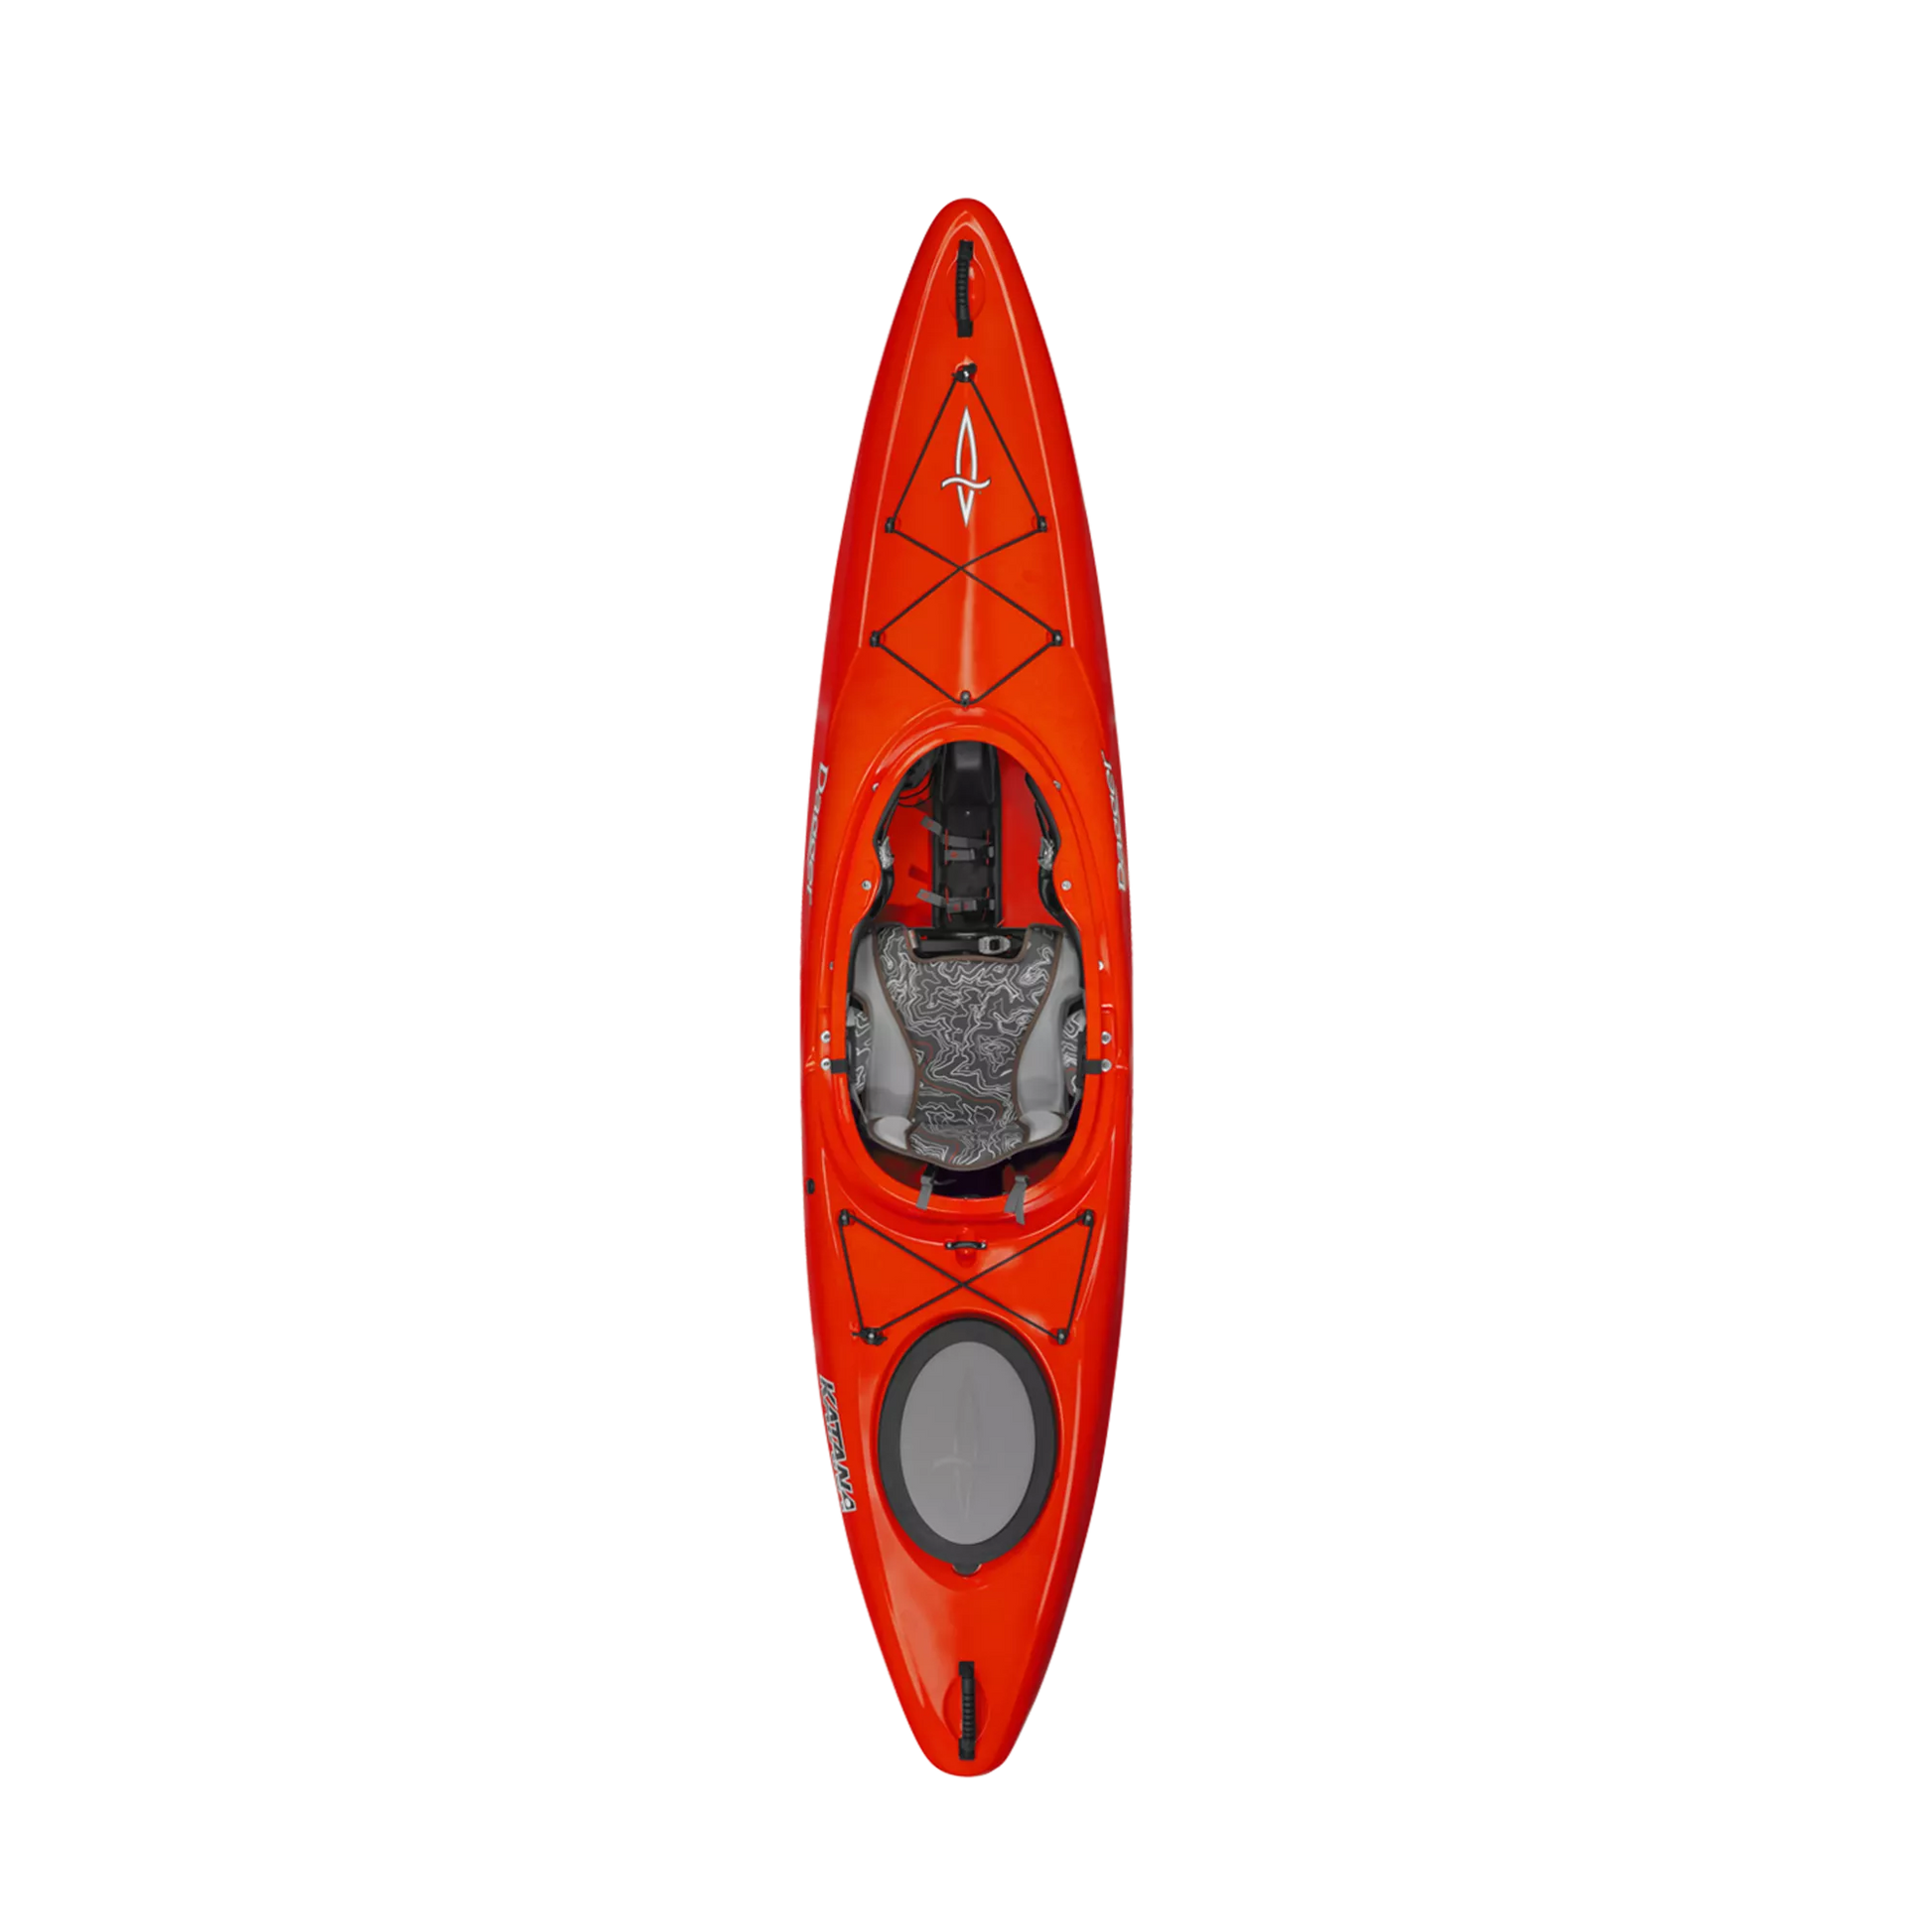 Top view of a red Dagger Katana whitewater kayak with paddle on a black background.